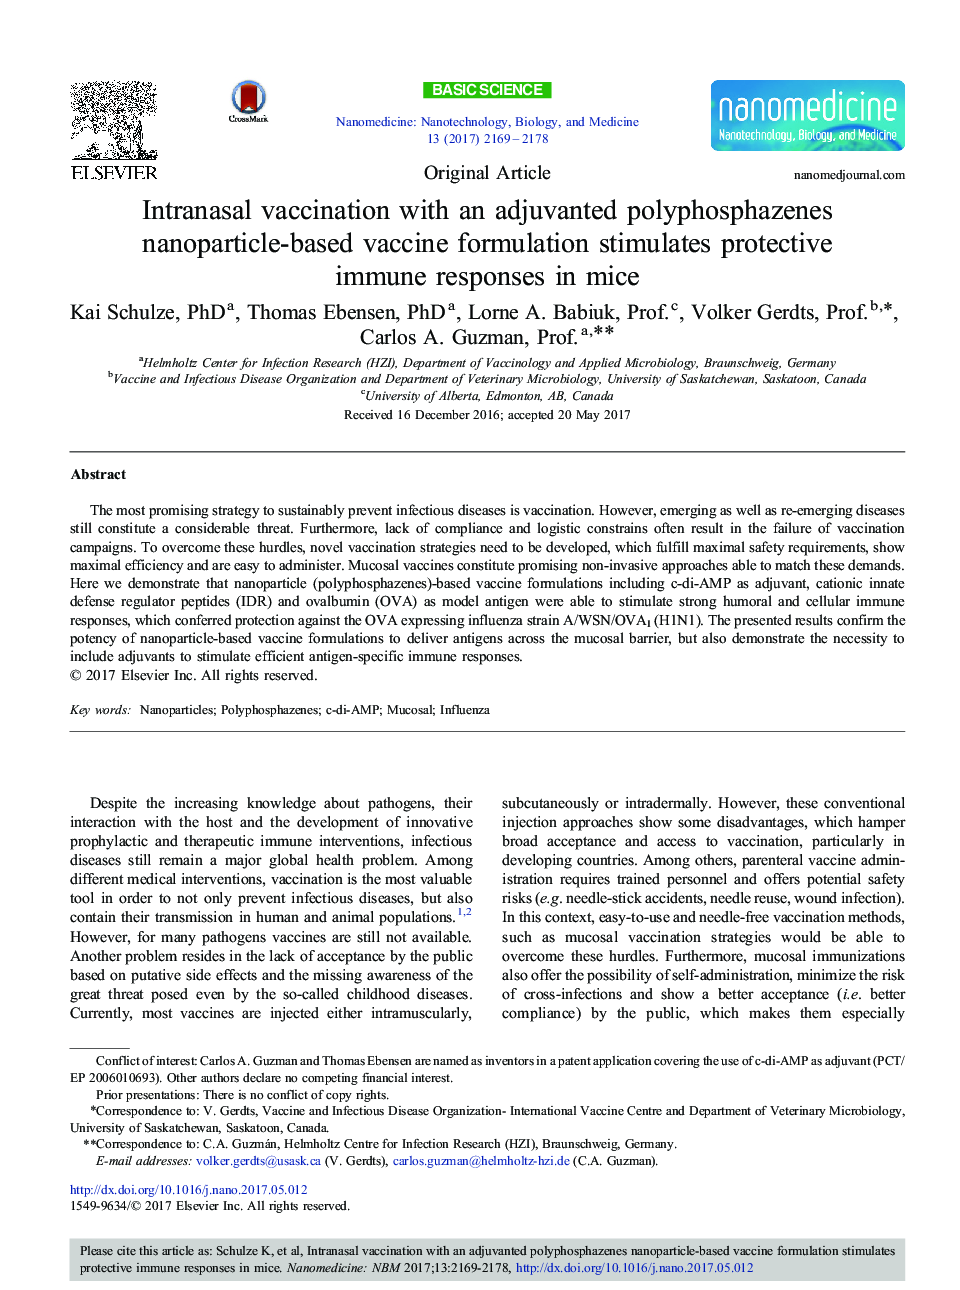 Original ArticleIntranasal vaccination with an adjuvanted polyphosphazenes nanoparticle-based vaccine formulation stimulates protective immune responses in mice